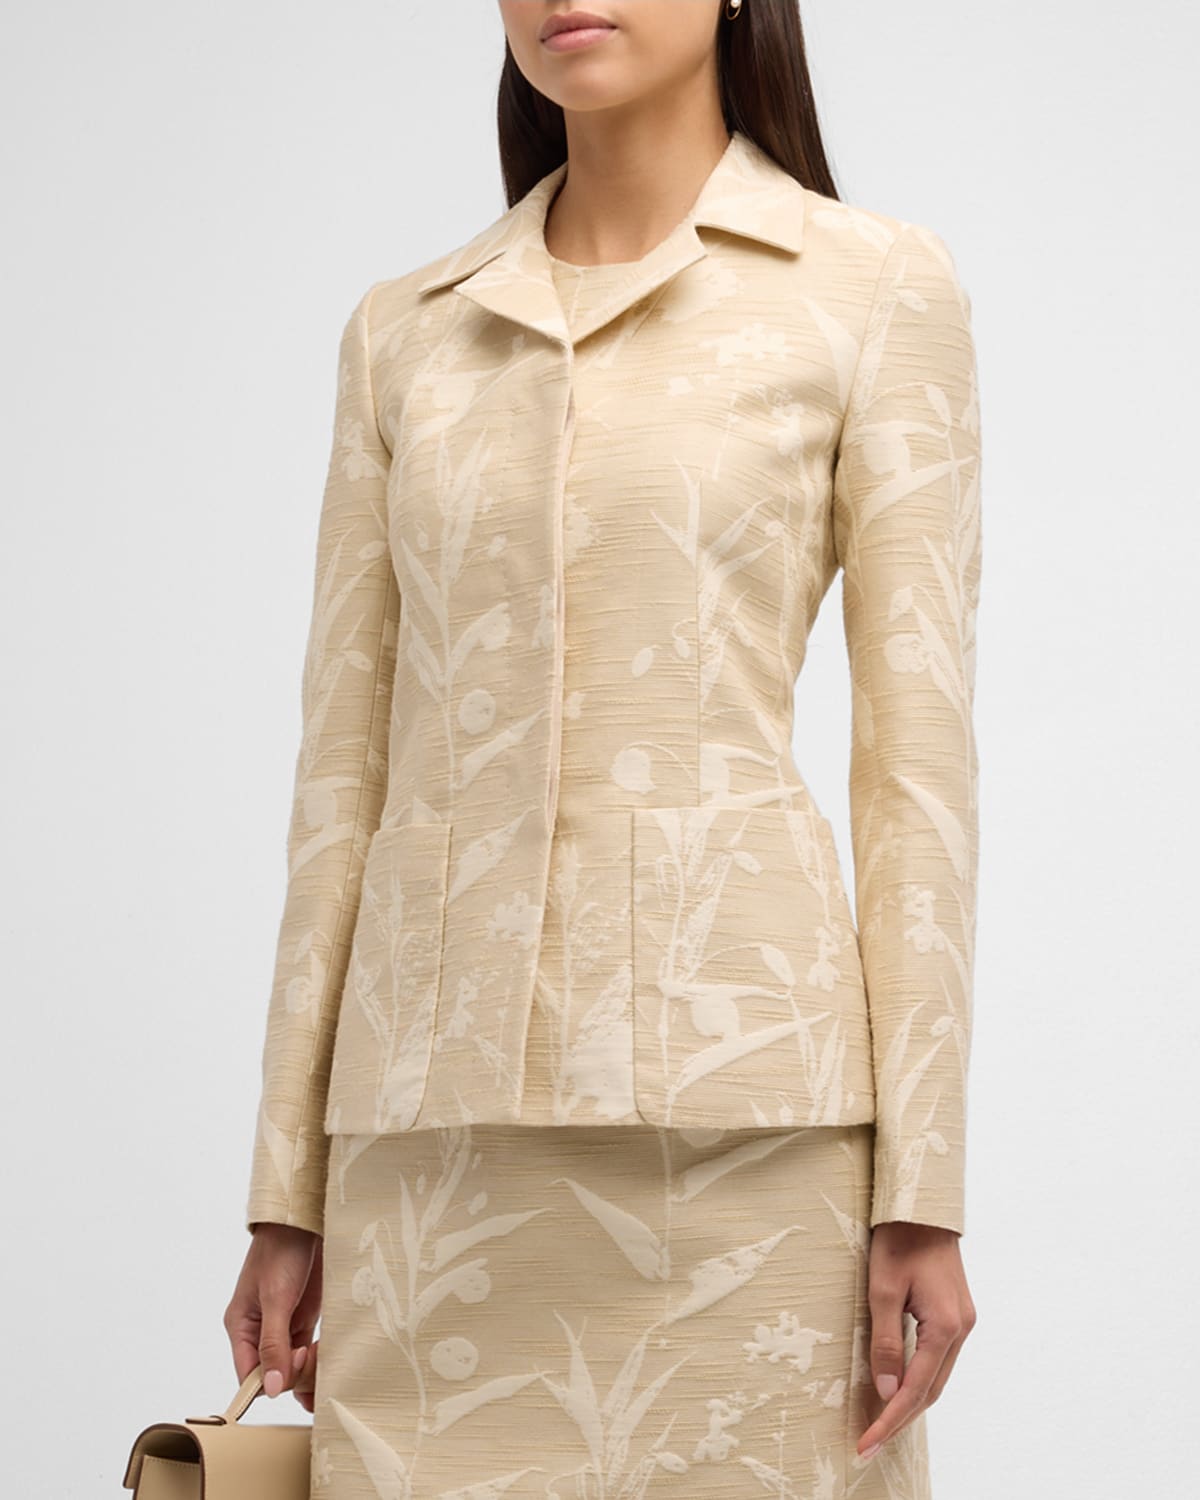 Tailored Button-Down Floral Jacquard Jacket